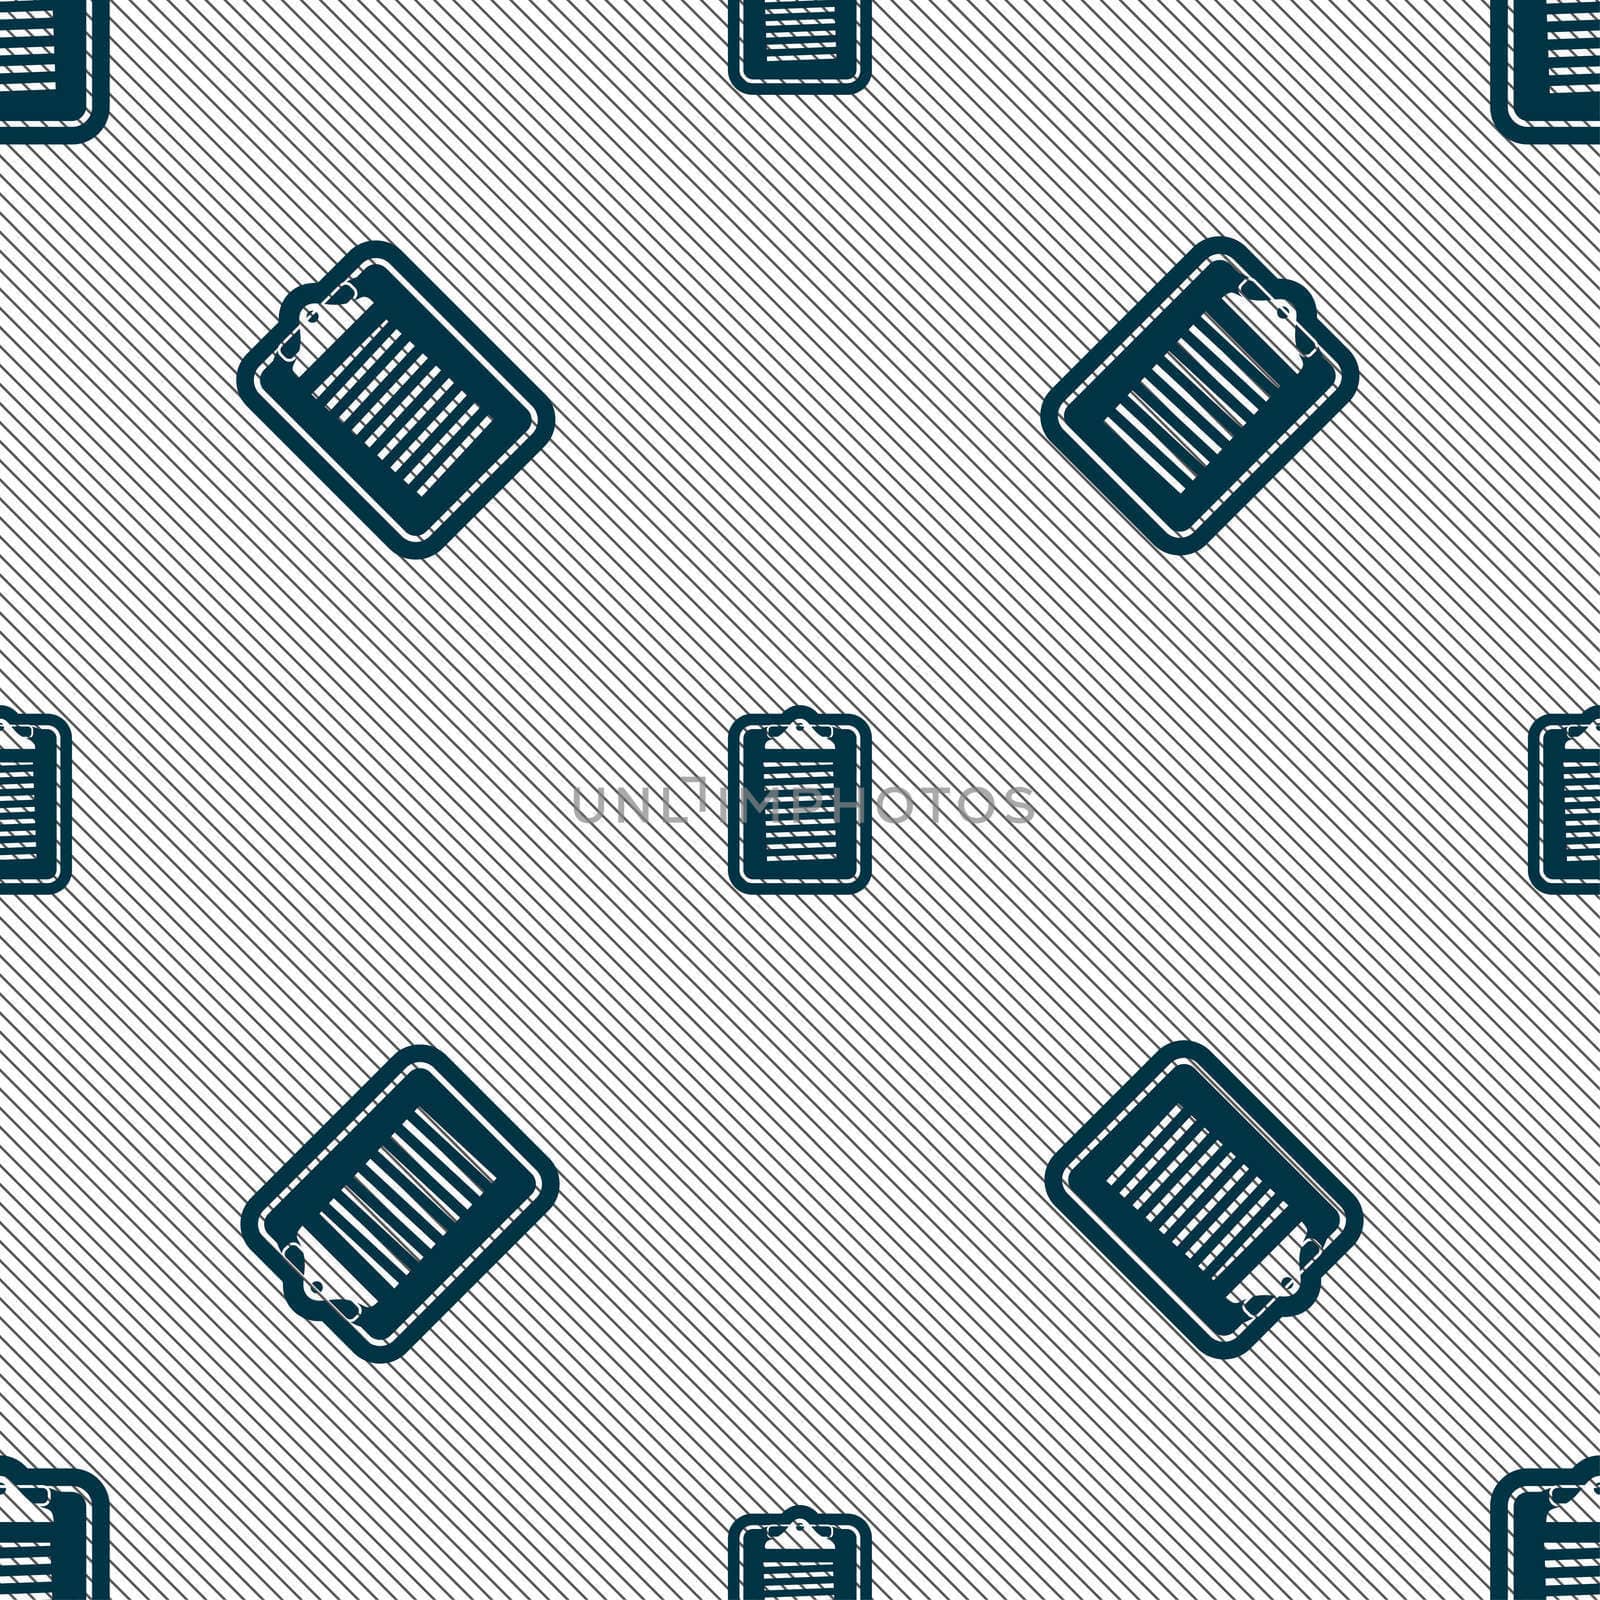 Text file icon sign. Seamless pattern with geometric texture. illustration